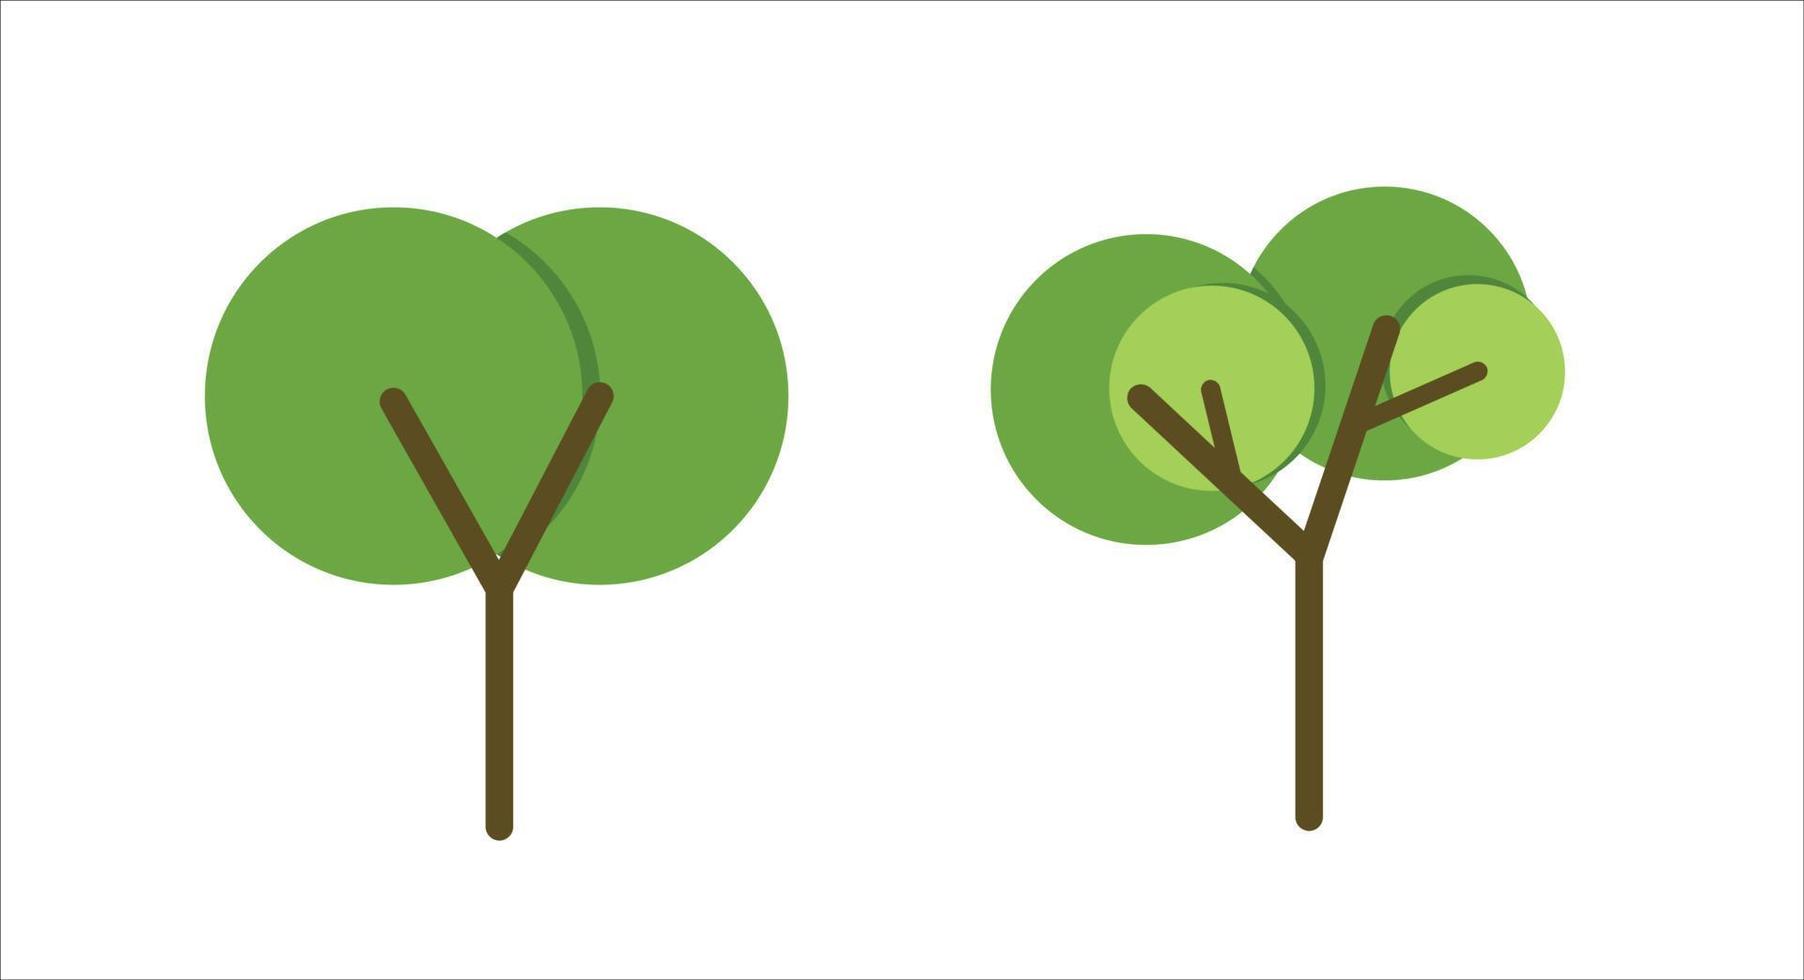 simple tree drawing in flat design vector